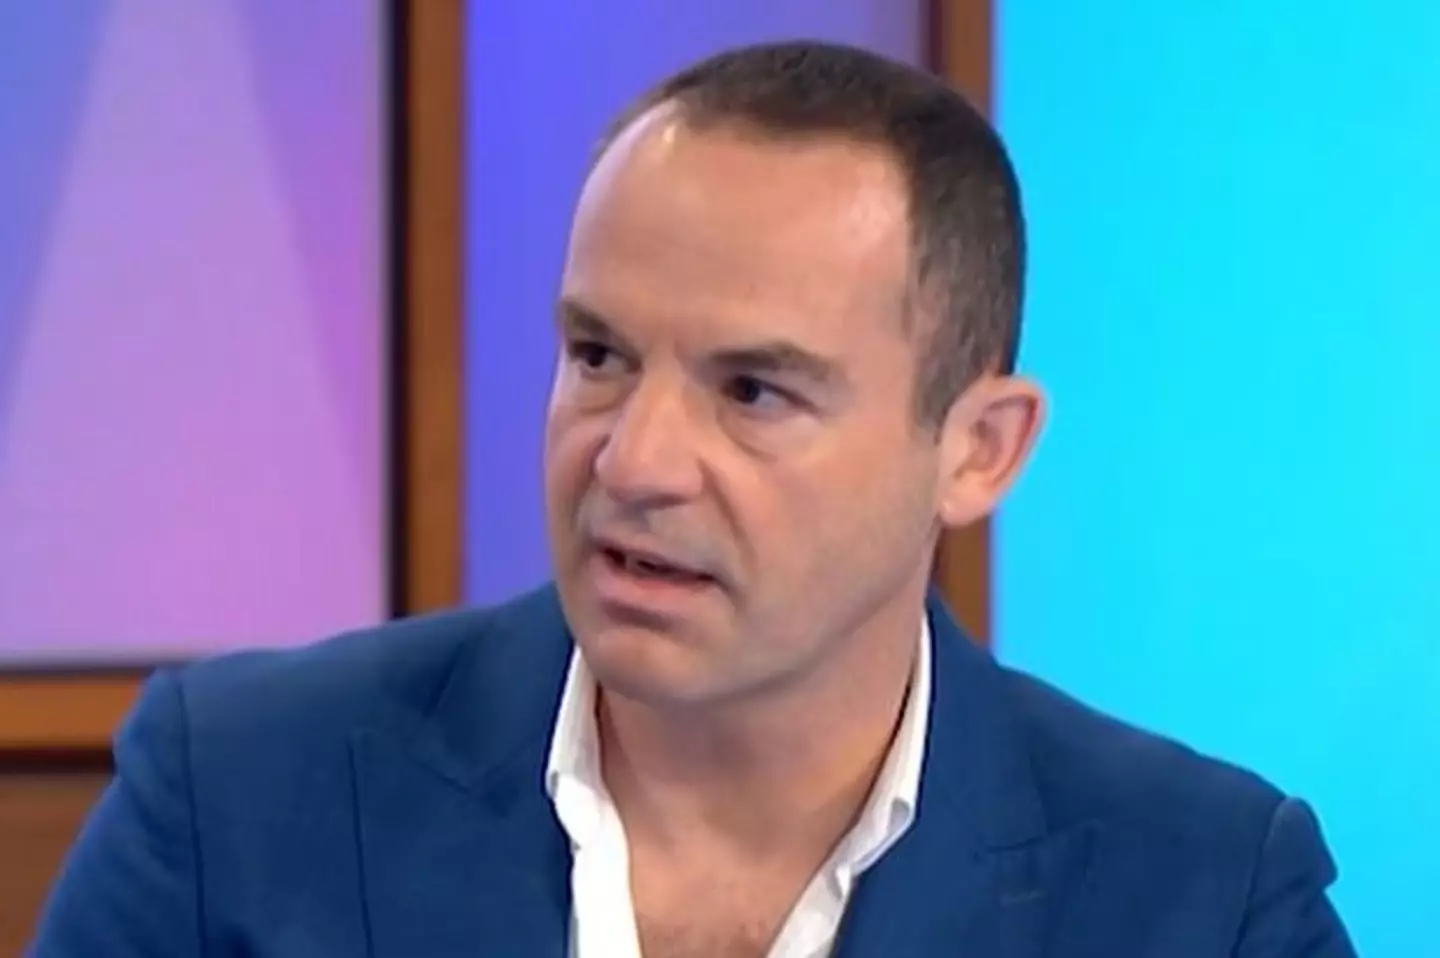 Martin Lewis has offered advice throughout the cost of living crisis. (